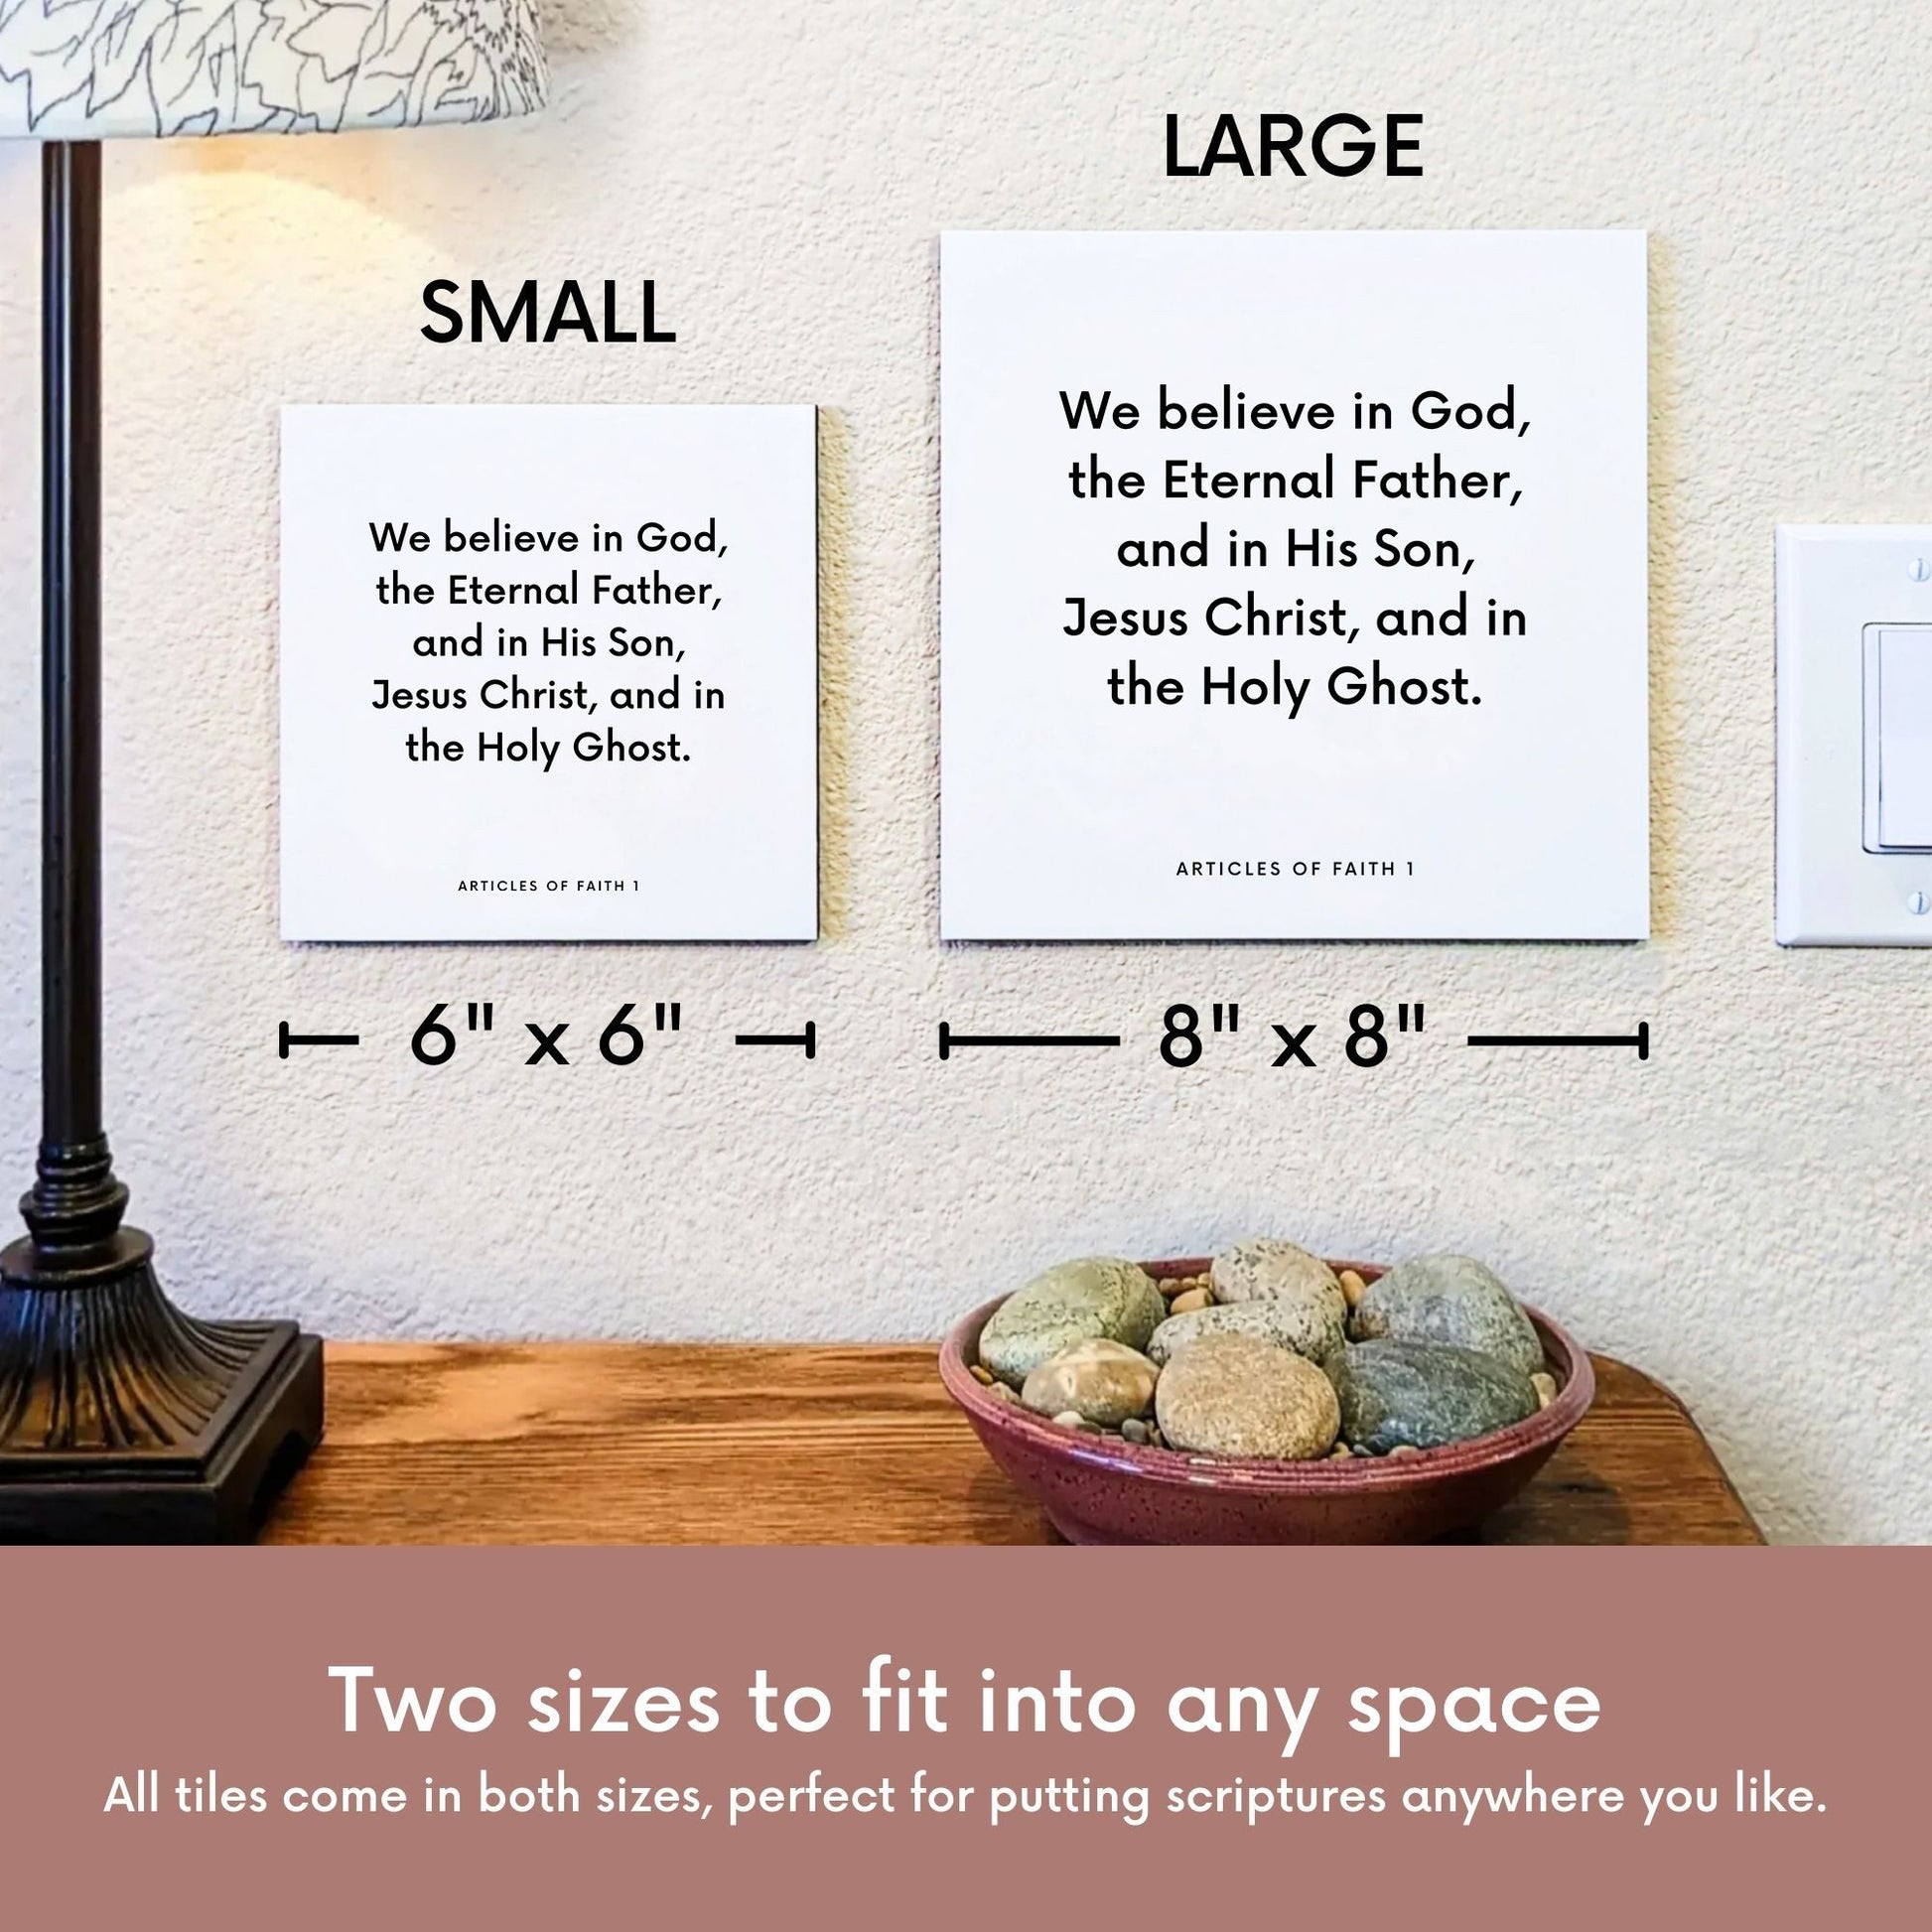 Scripture tile size comparison for Articles of Faith 1 - "We believe in God, the Eternal Father"